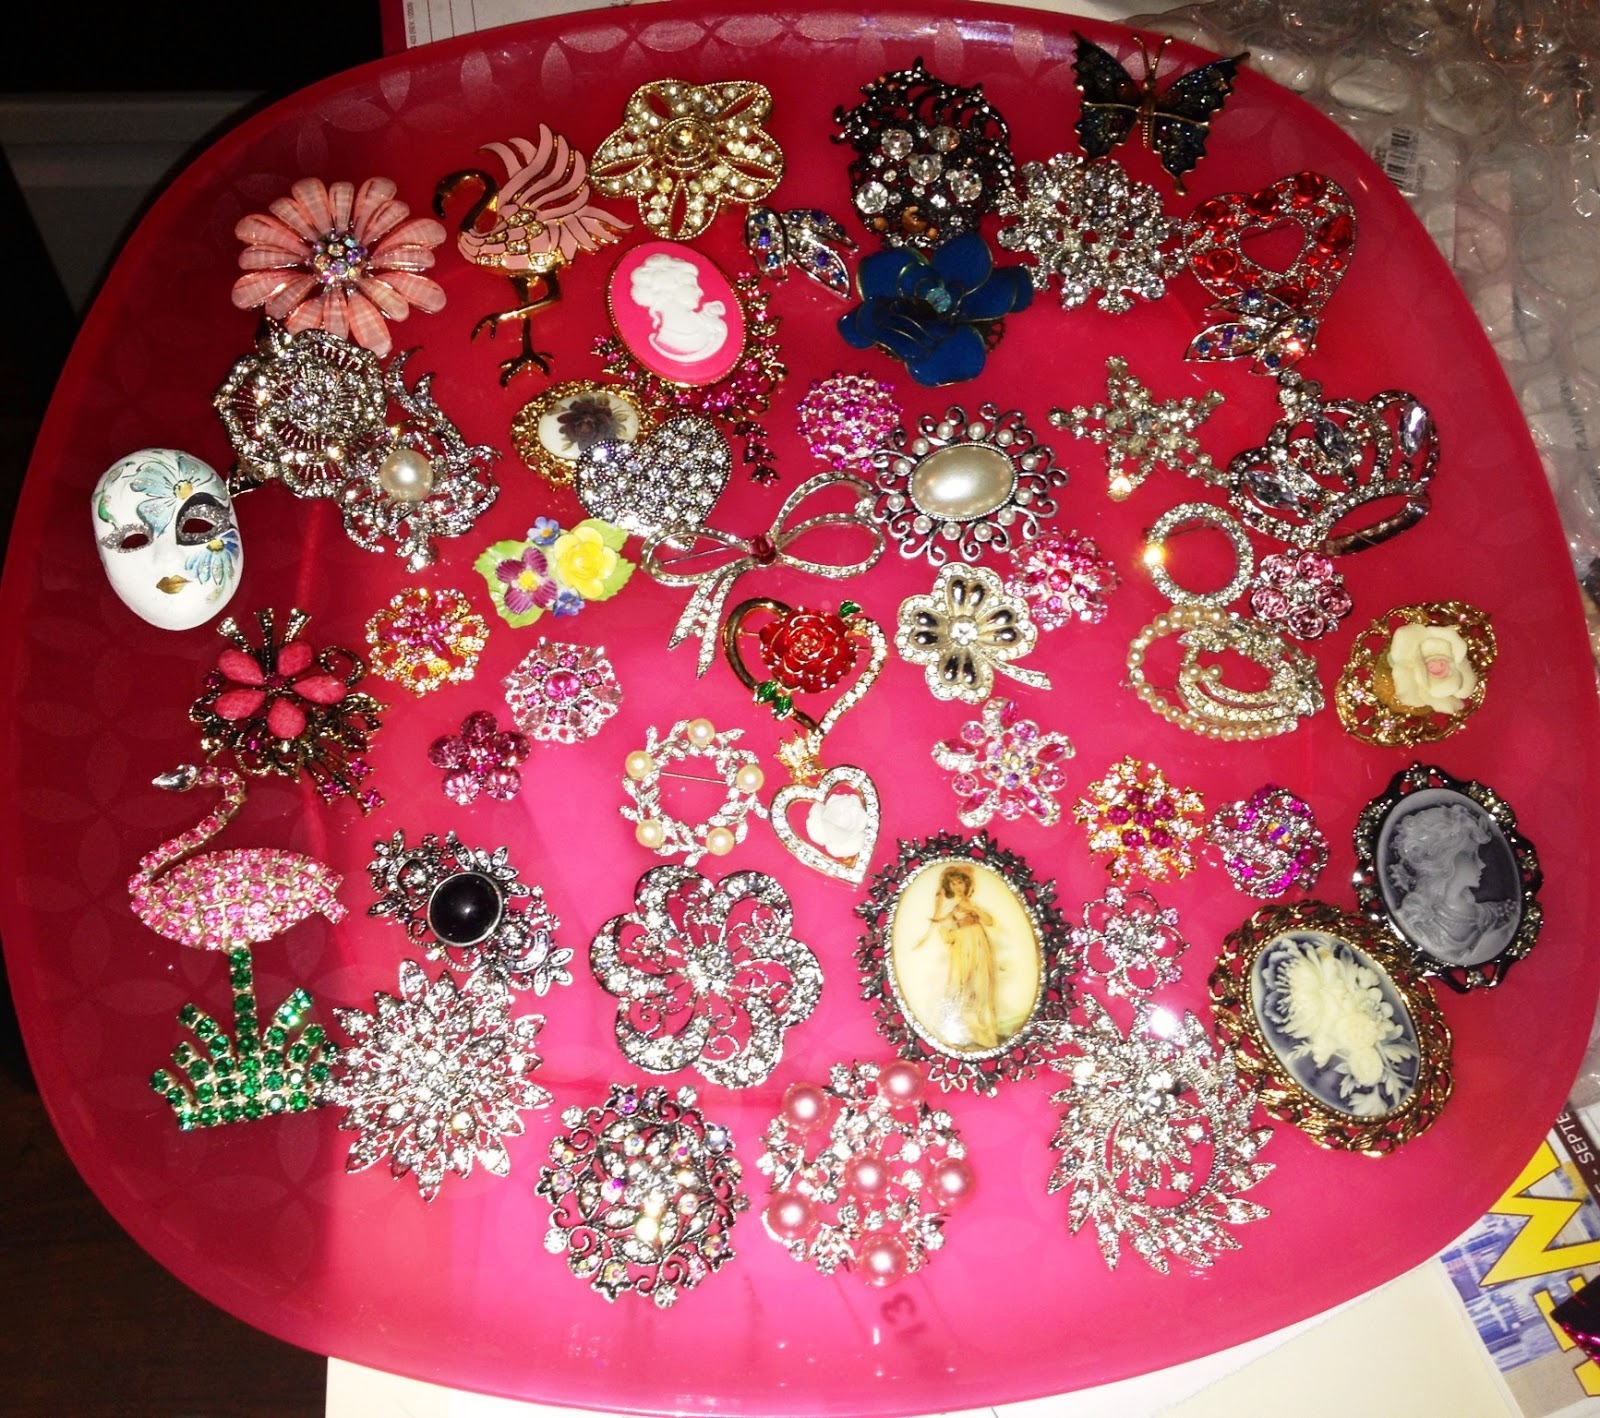 Thinking Pink: Brooches Brooches Everywhere